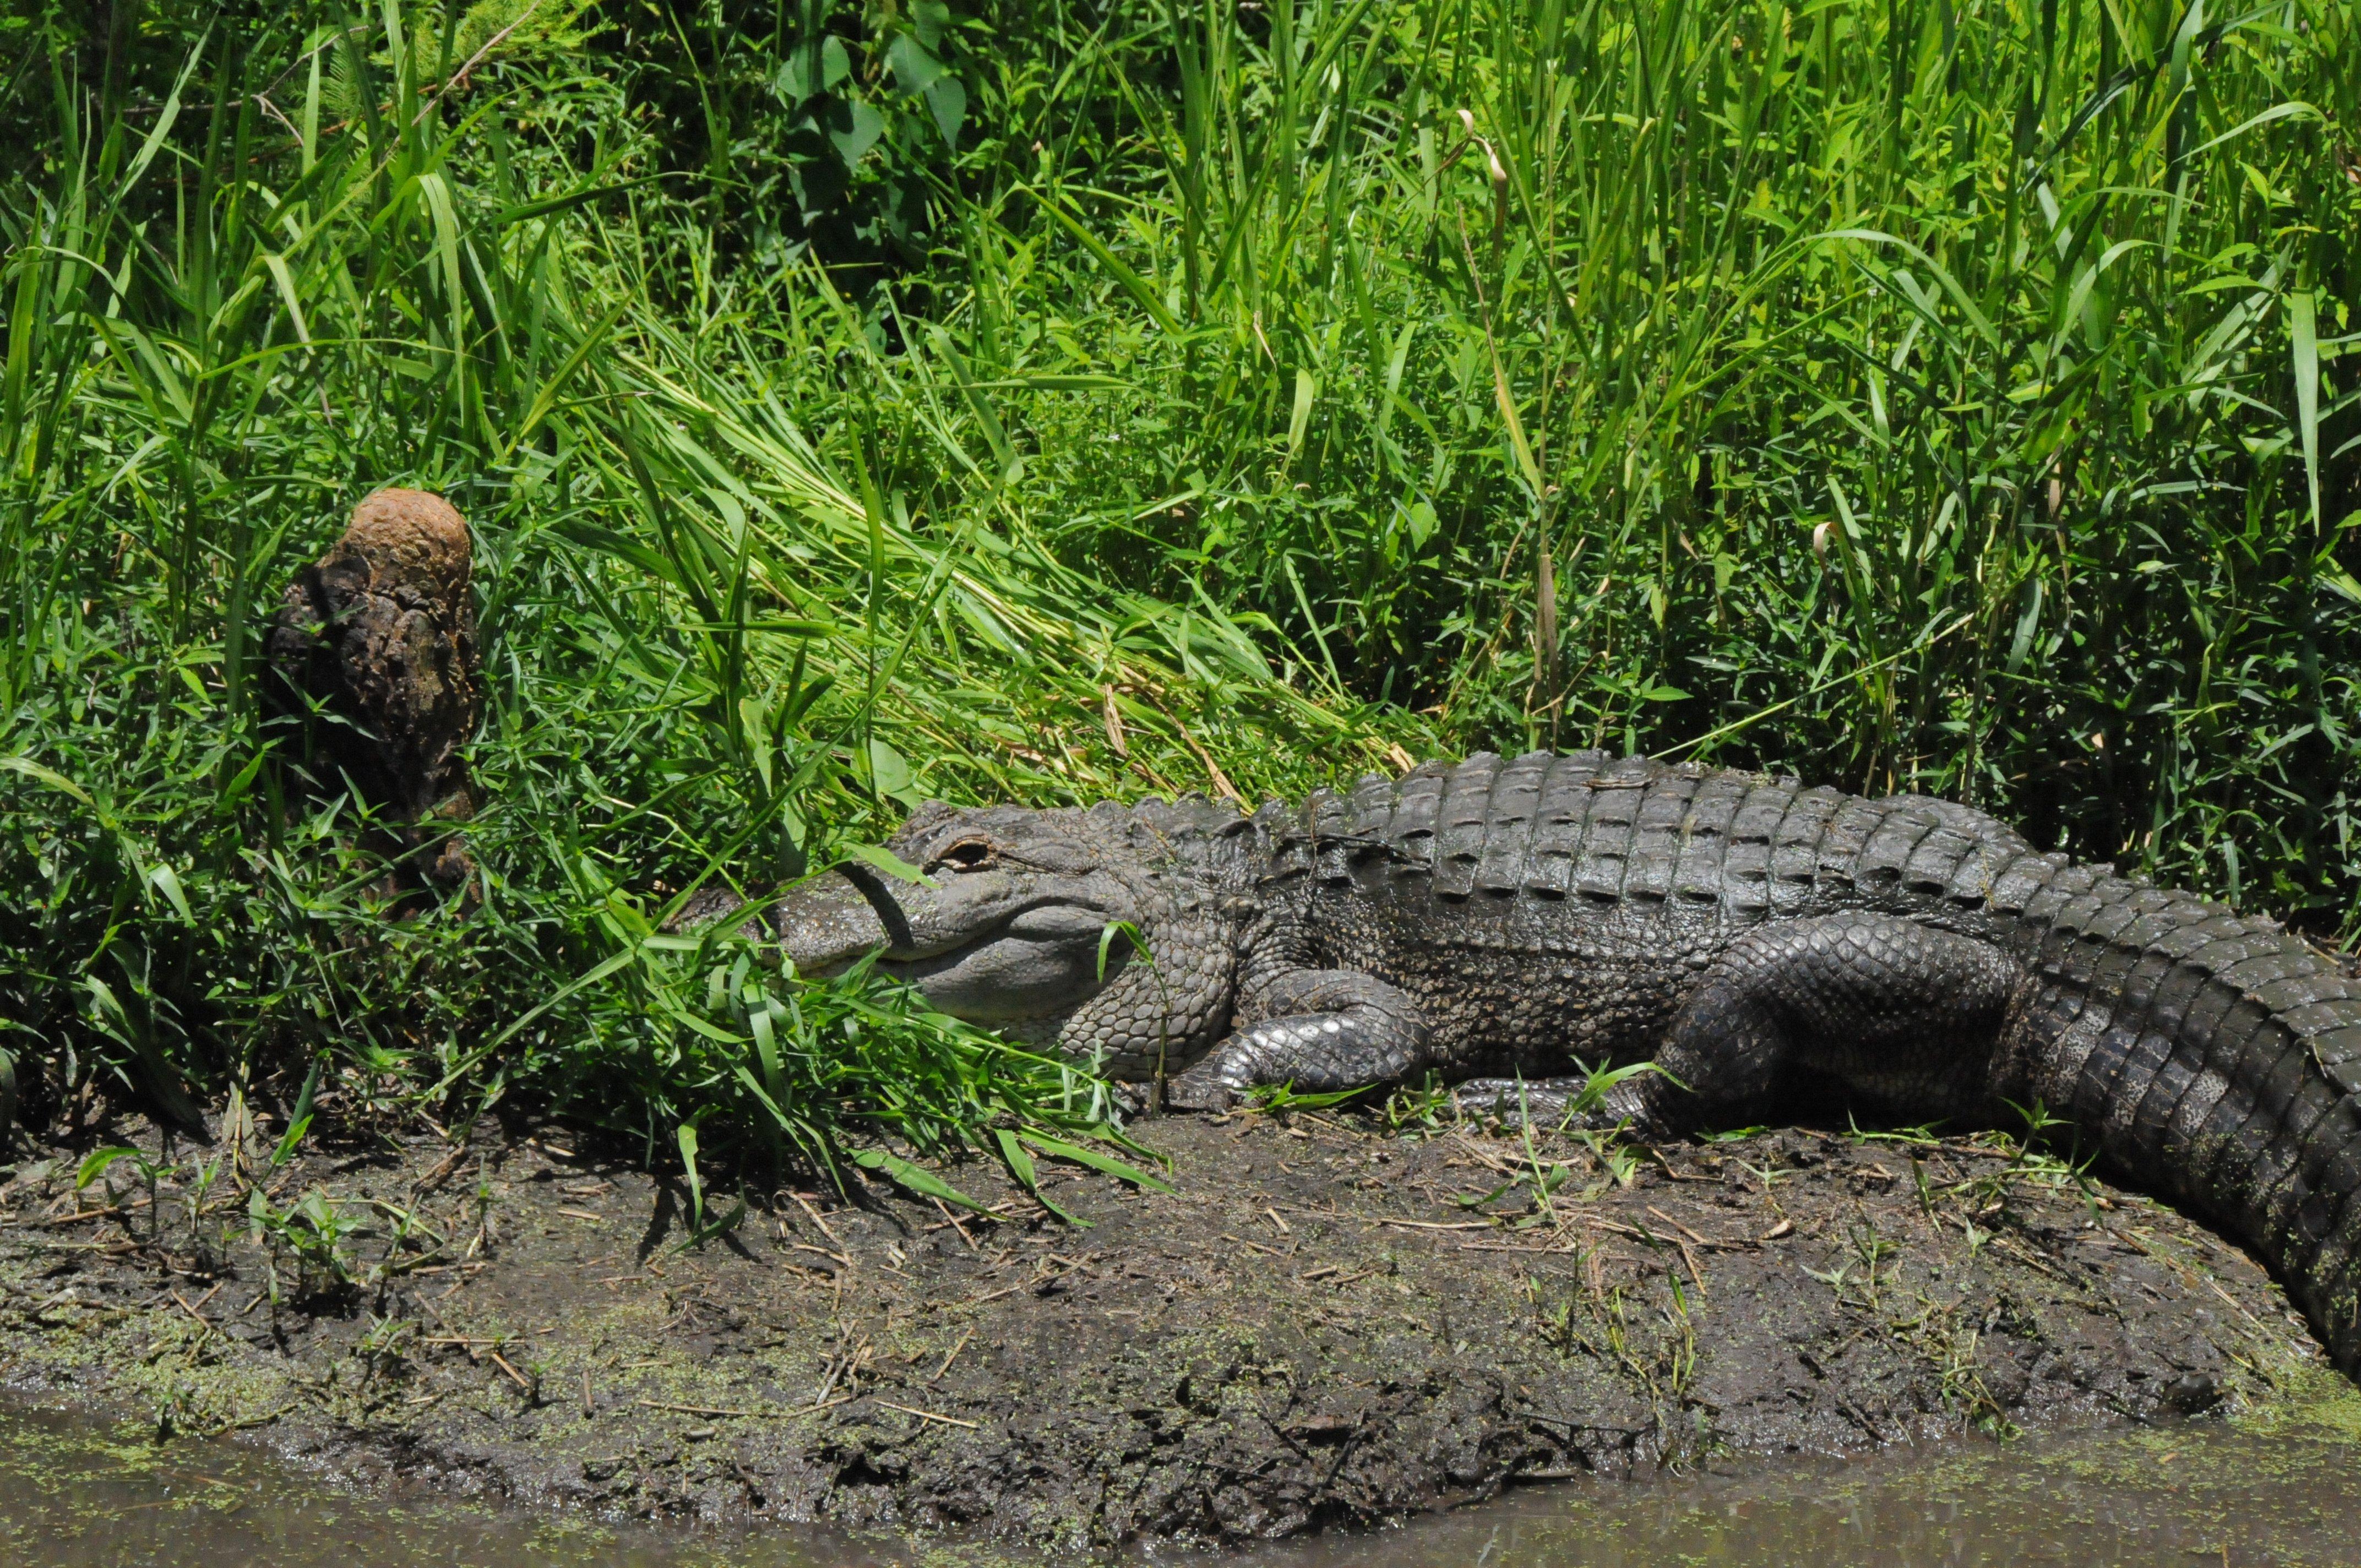 The proposal would also allow alligator hunting at three national wildlife refuges. (author image)